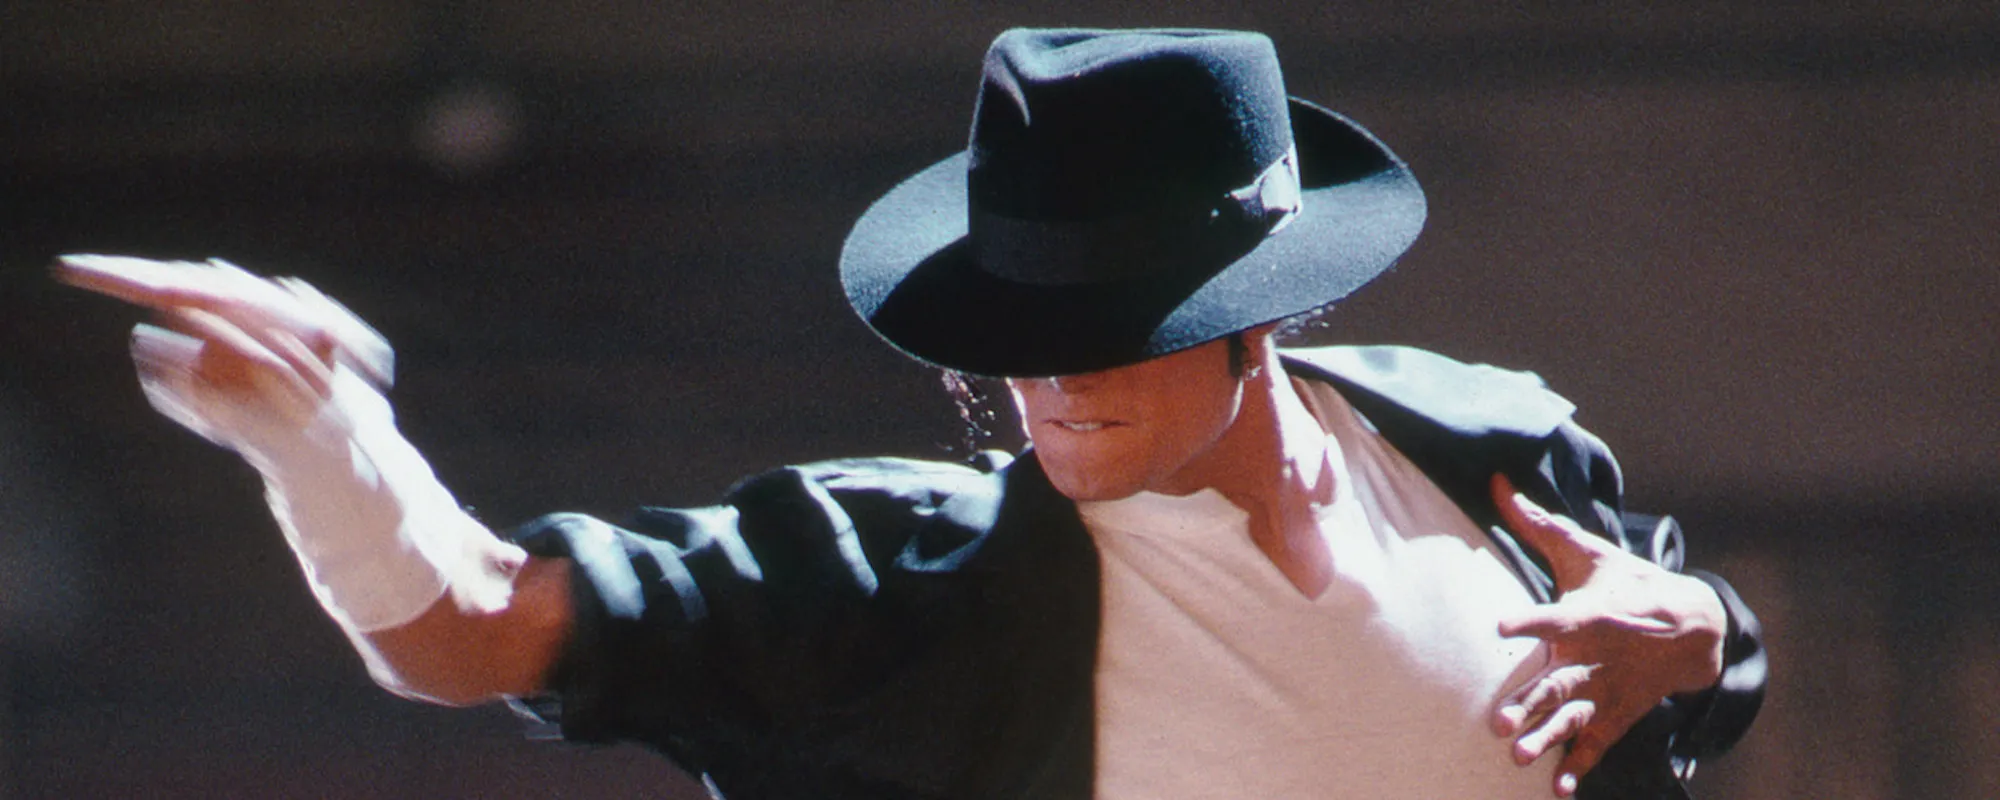 New Documentary to Give Inside Look into Michael Jackson’s ‘Thriller’